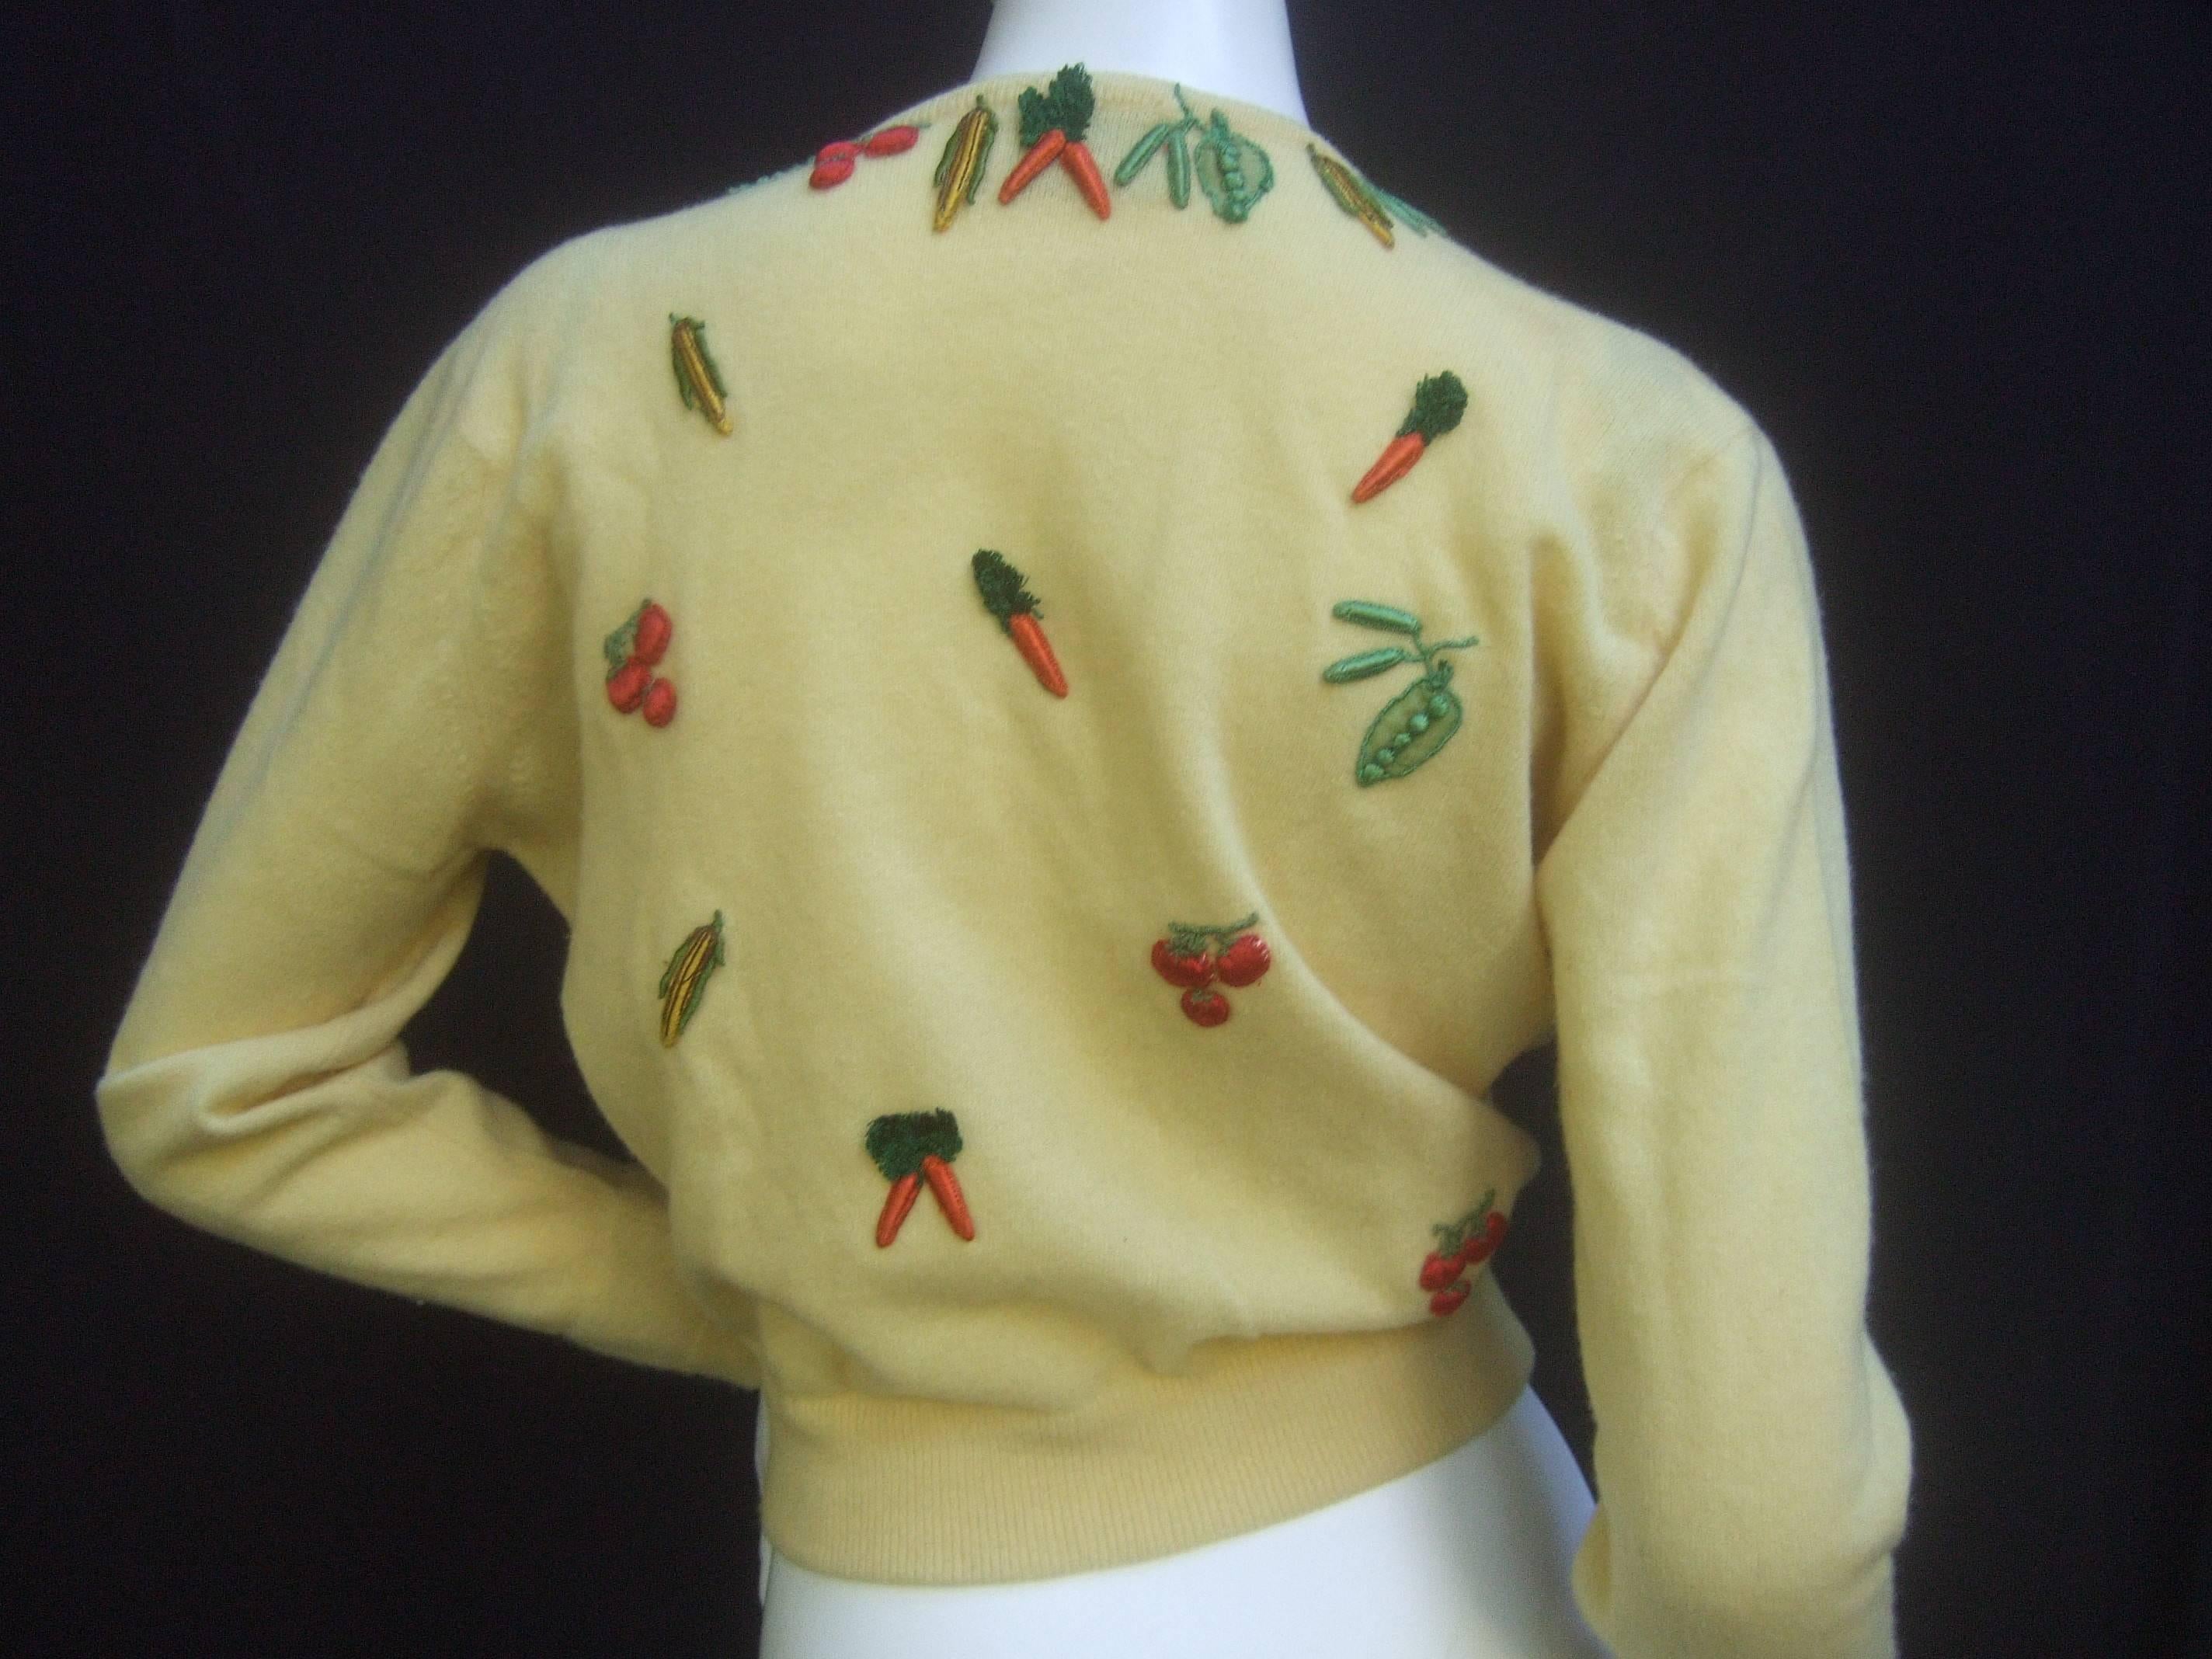 Whimsical Buttercup Yellow Cashmere Vegetable Theme Cardigan by Dalton c 1960  3